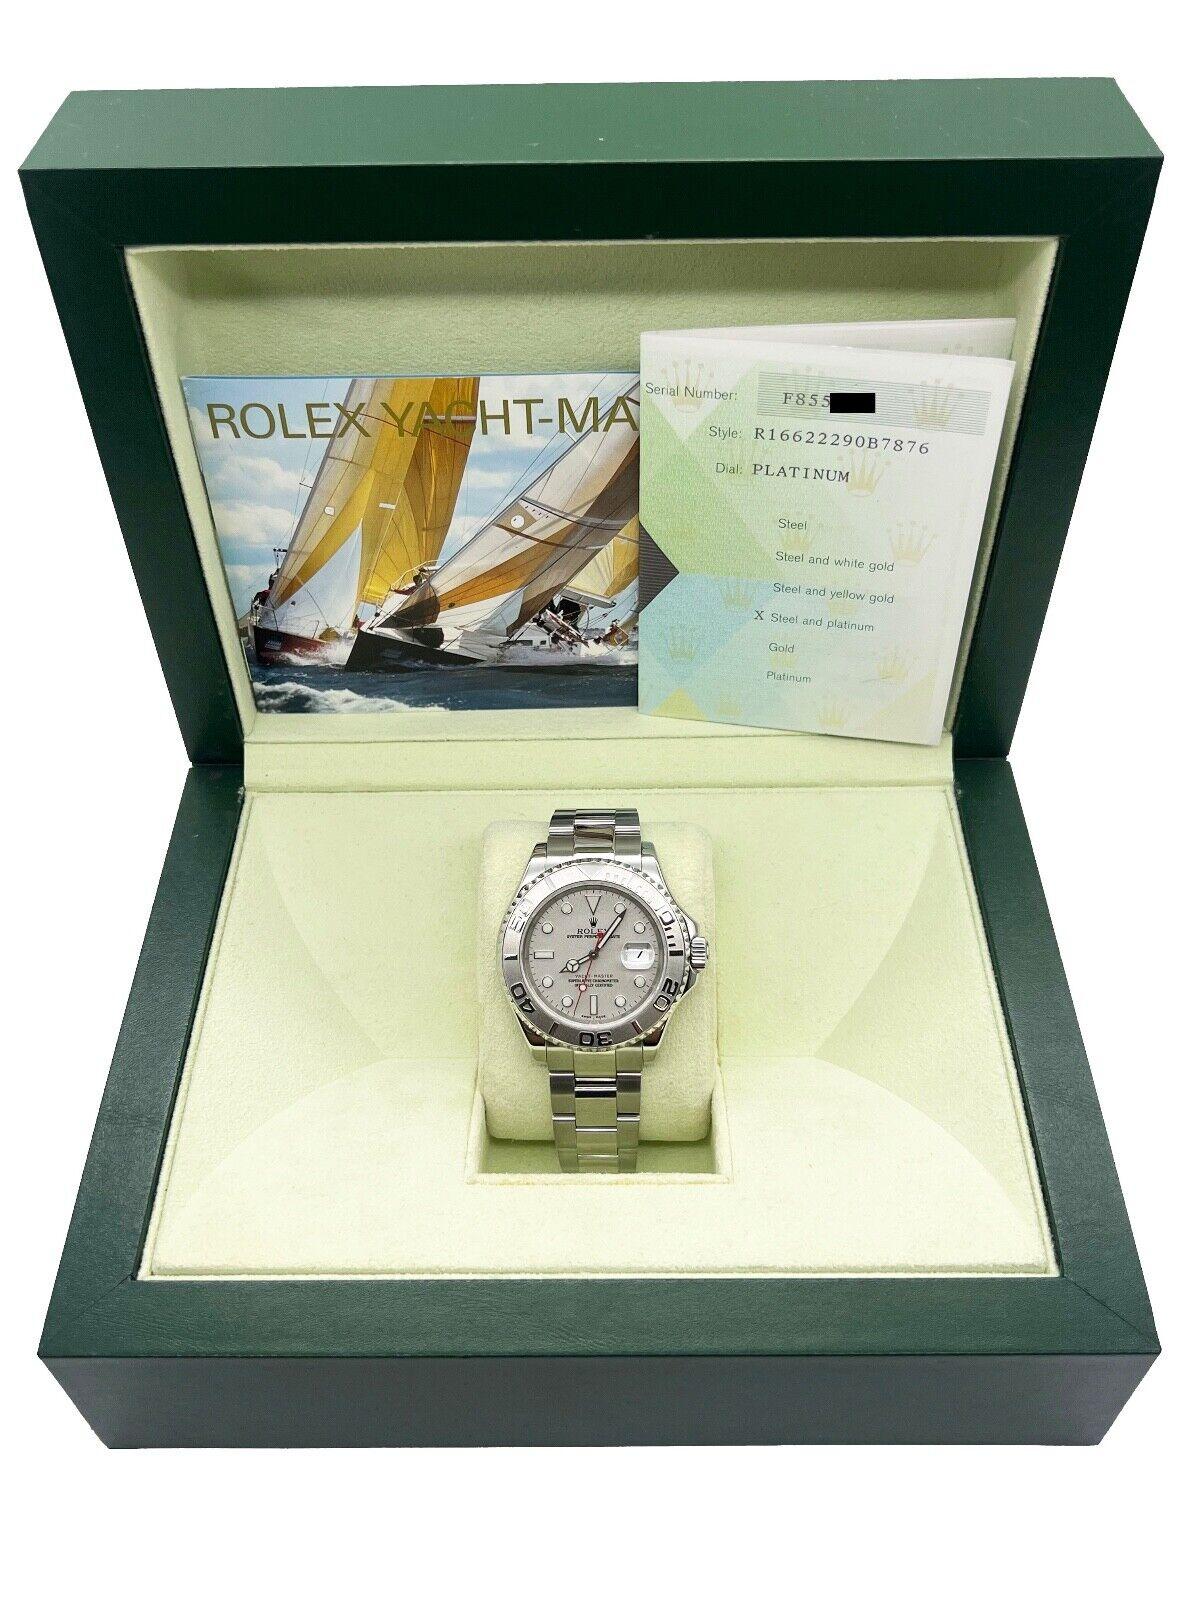 Rolex 16622 Yacht Master Platinum Dial Platinum Stainless Steel Box Papers For Sale 1